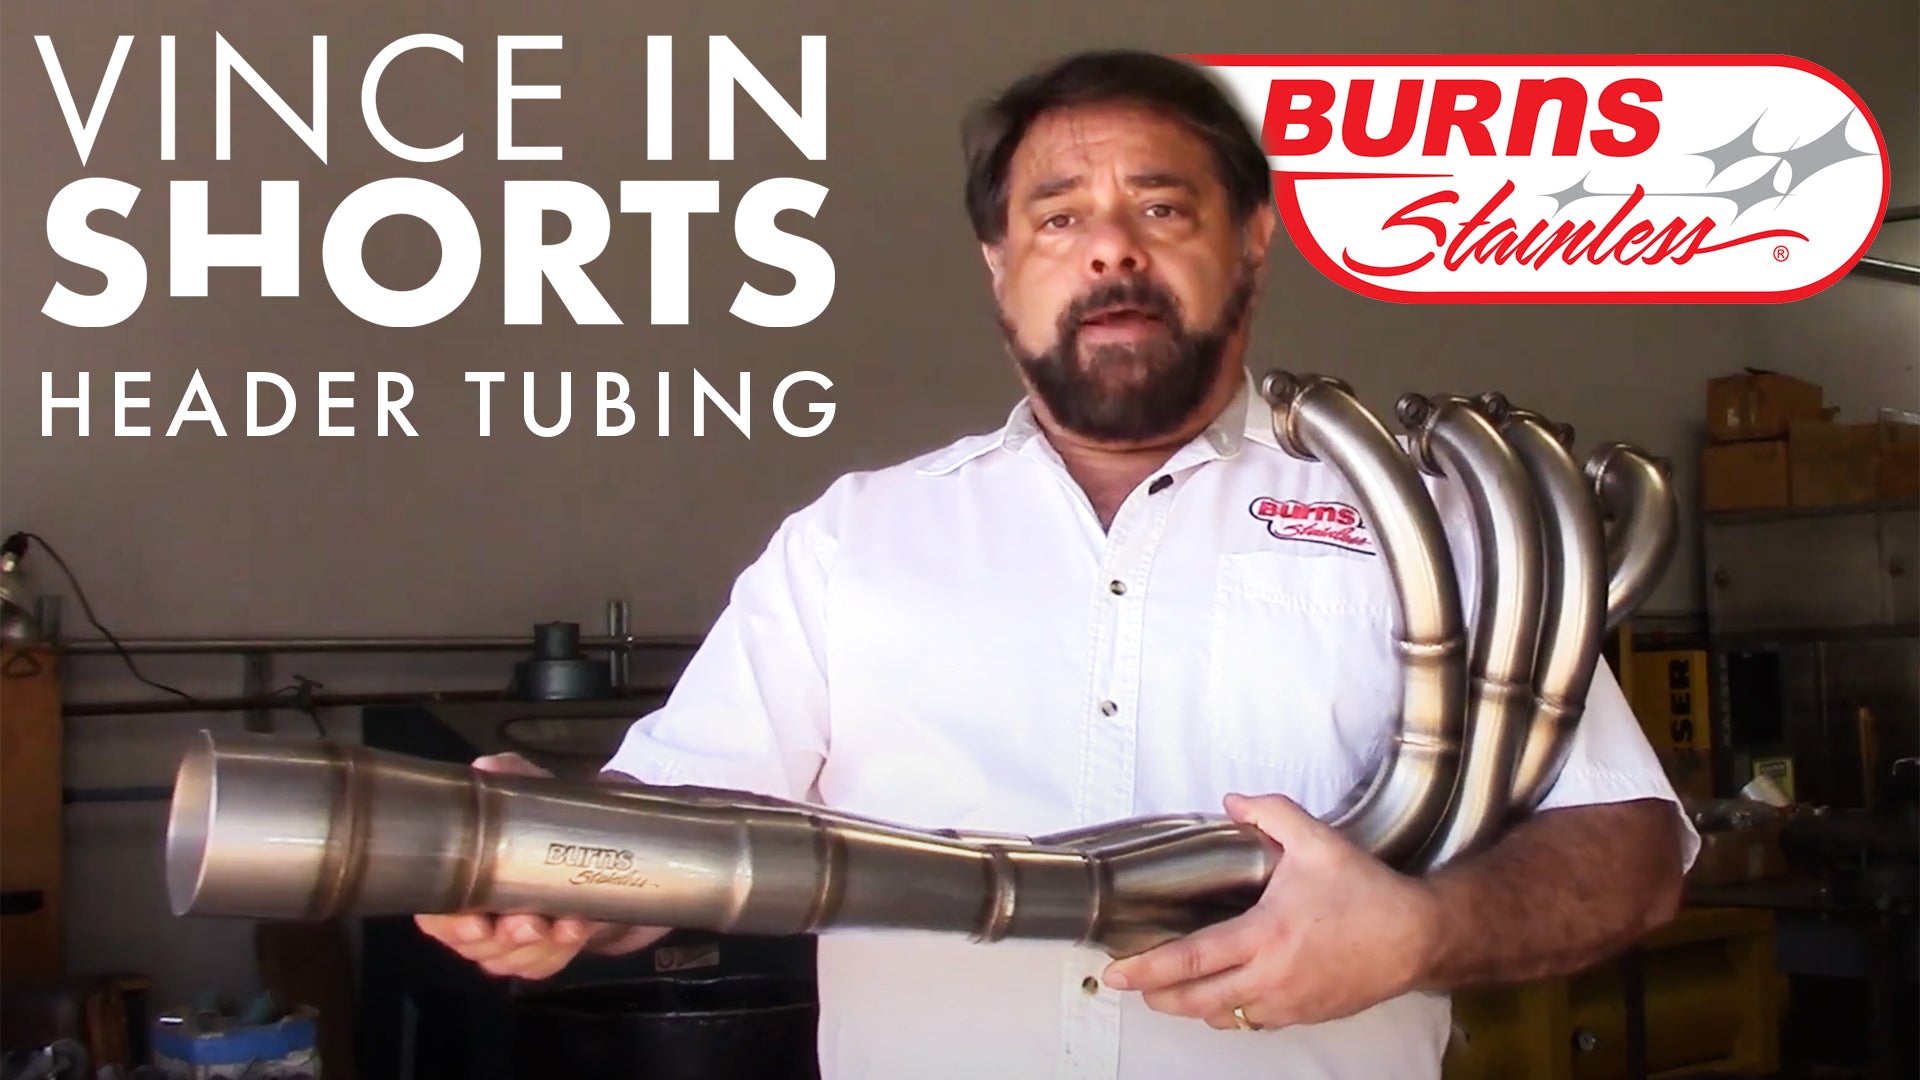 Exhaust Header Tubing - Vince In Shorts 3